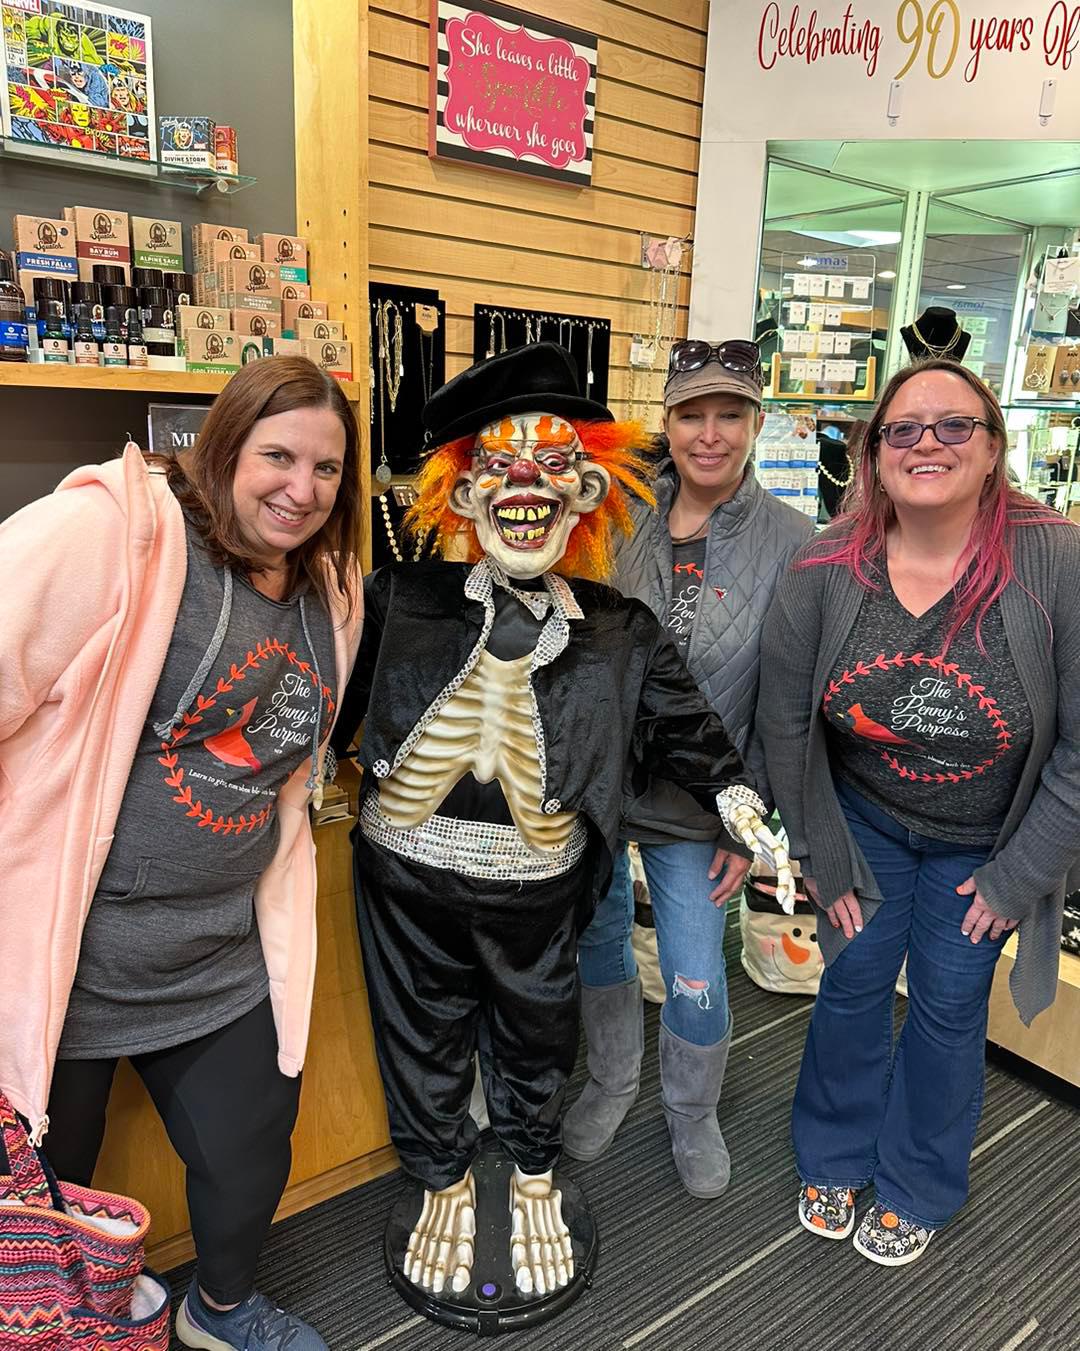 Just another average Saturday at Merle Norman Antioch! Hanging with Mr. Bones and some of our favori Merle Norman Cosmetics, Wigs and Boutique Antioch (224)788-8820